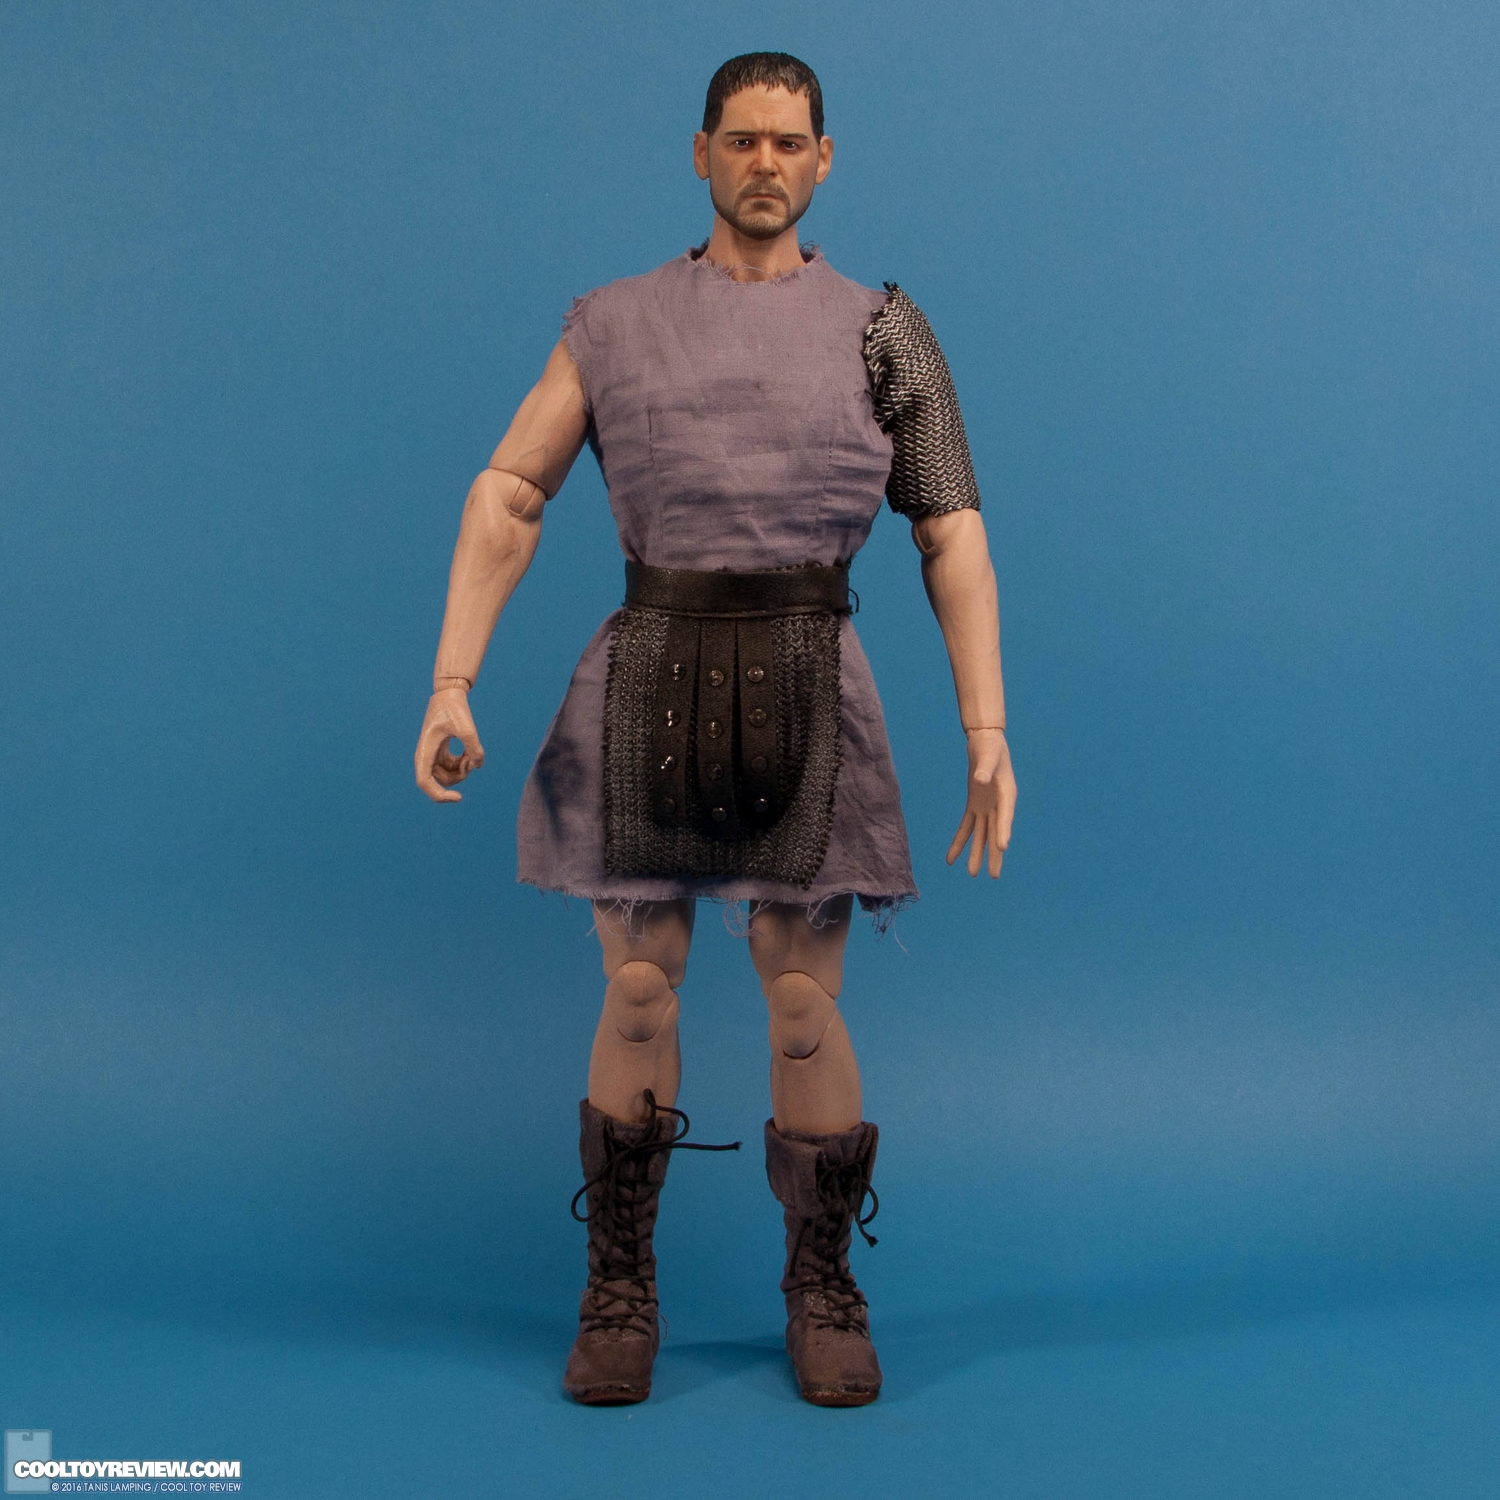 pangaea-toy-gladiator-general-sixth-scale-collectible-figure-033.jpg